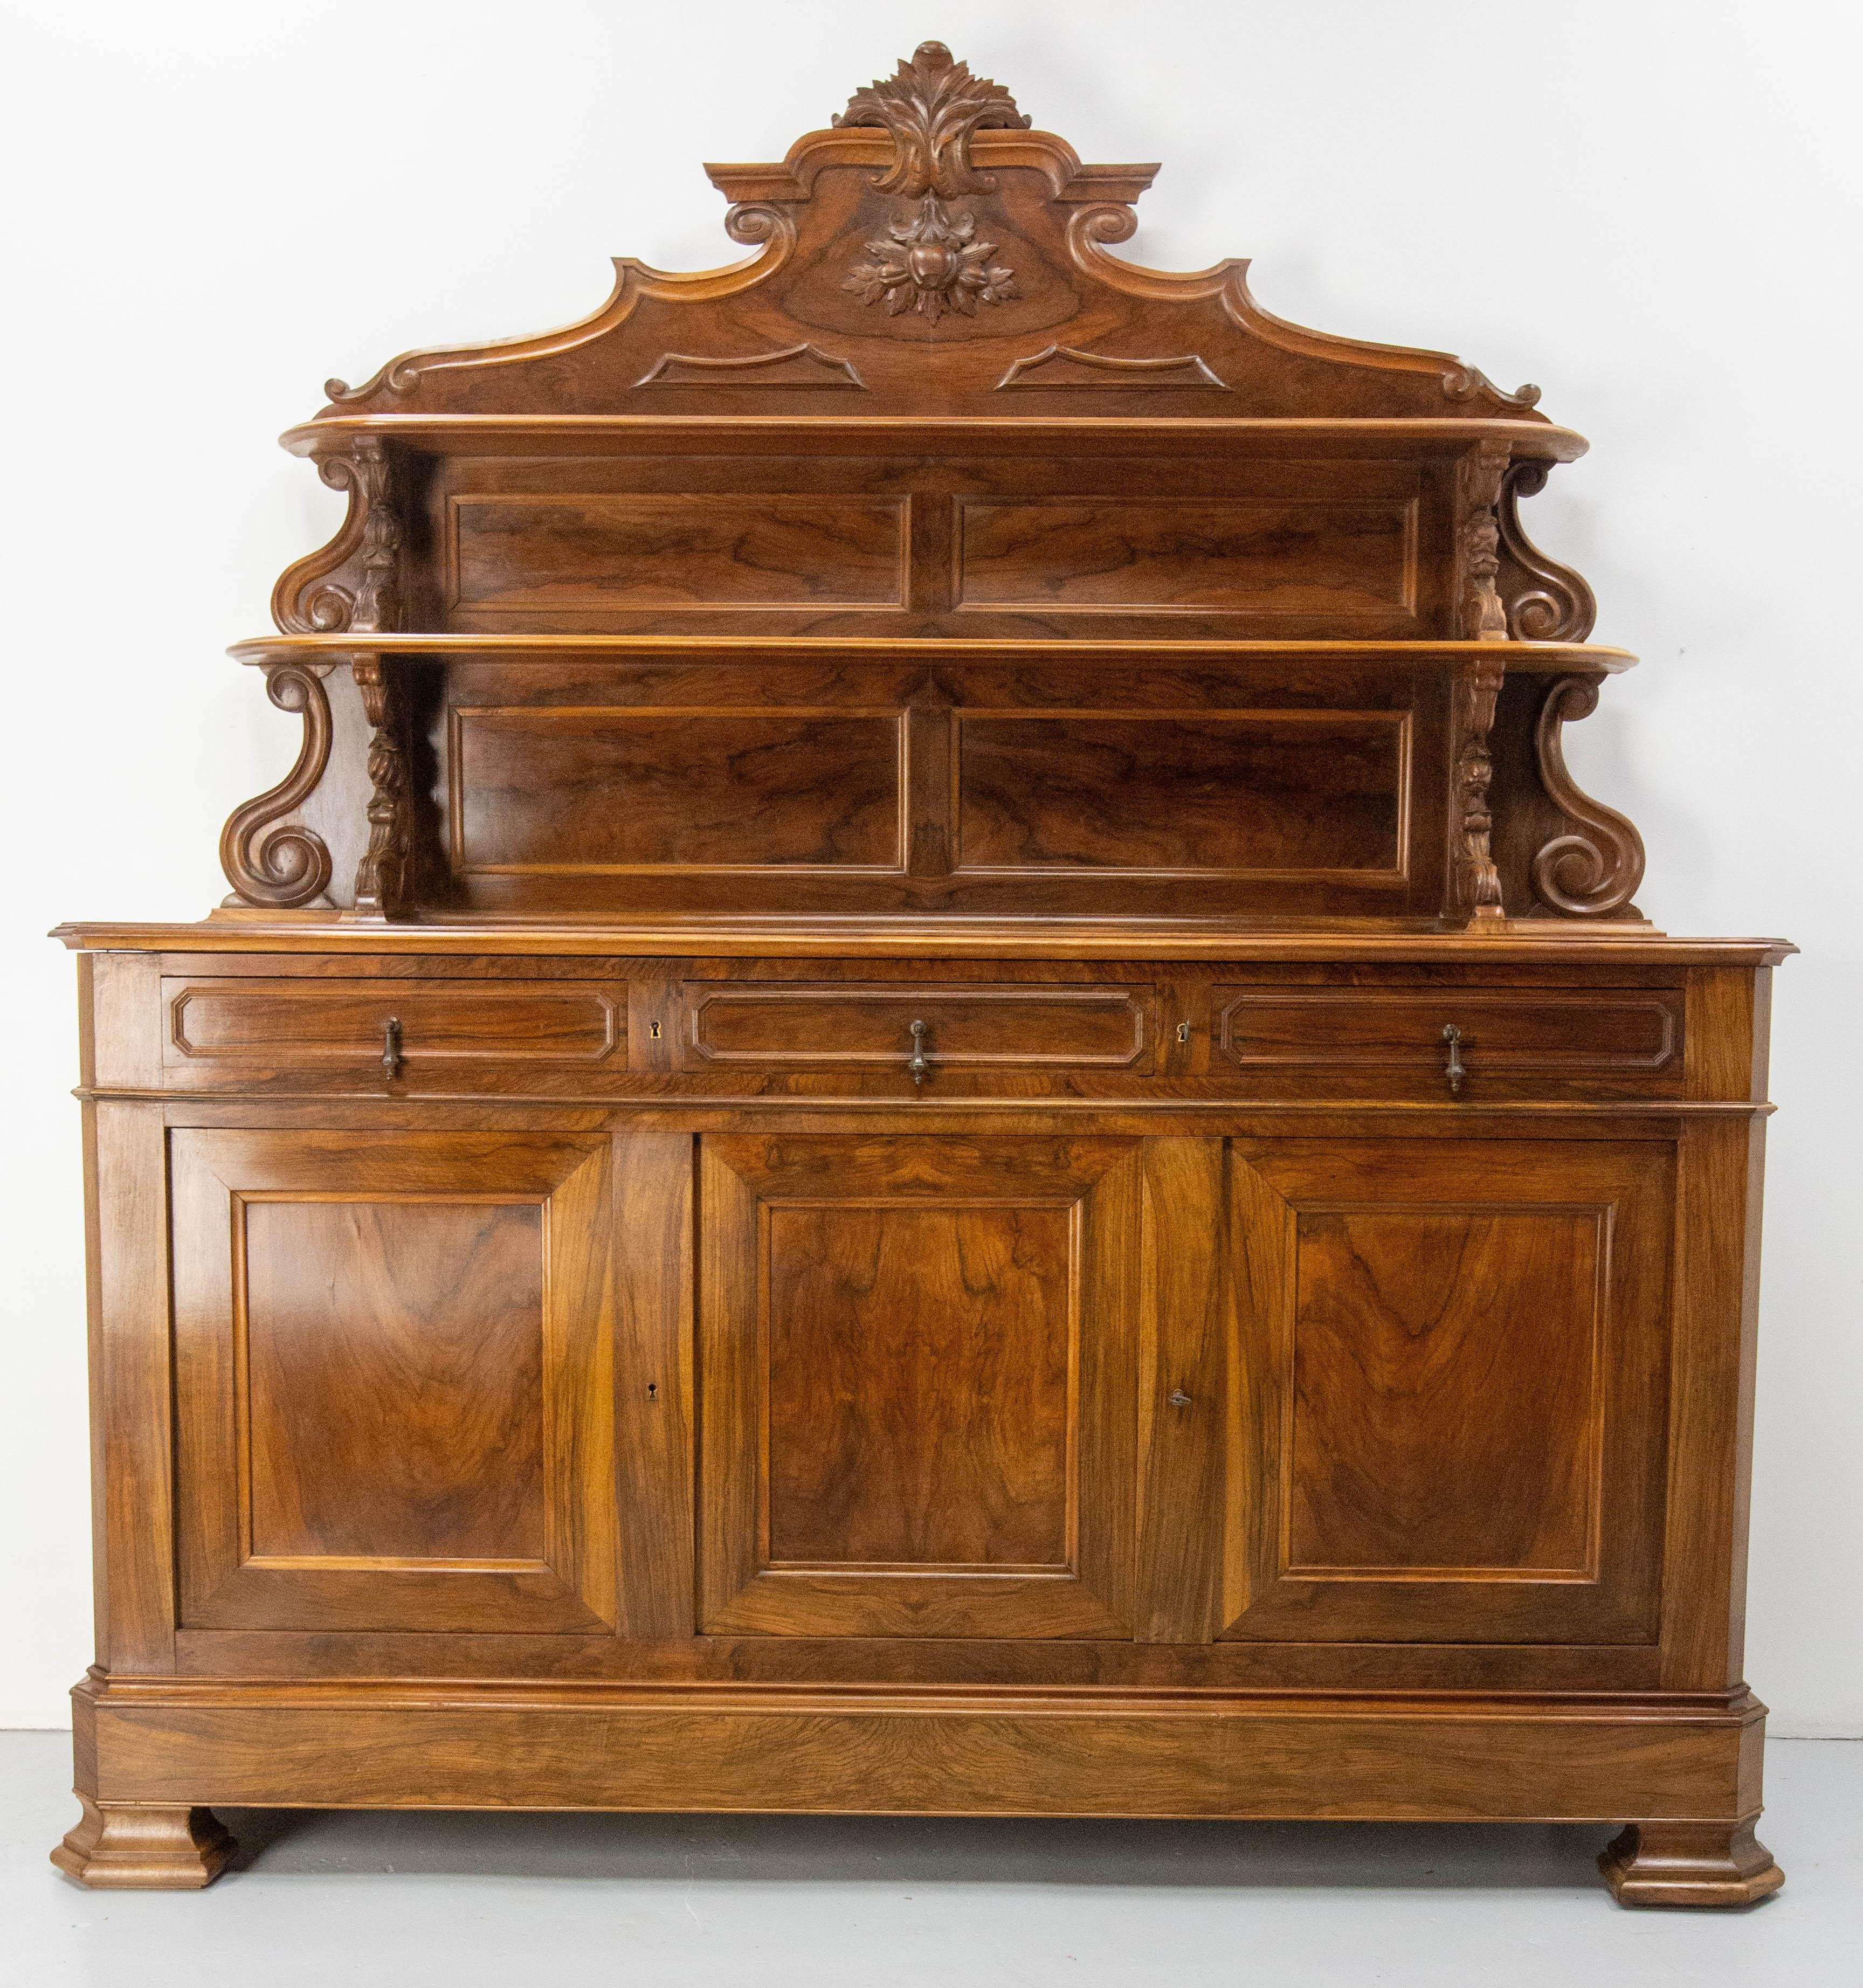 Antique Louis Philippe buffet cabinet,  made circa 1850-1860
This type of buffet was used as the centrepiece of a room. It was used to store tableware in the lower part of the cabinet and to display the finest specimens on the upper shelves. In the